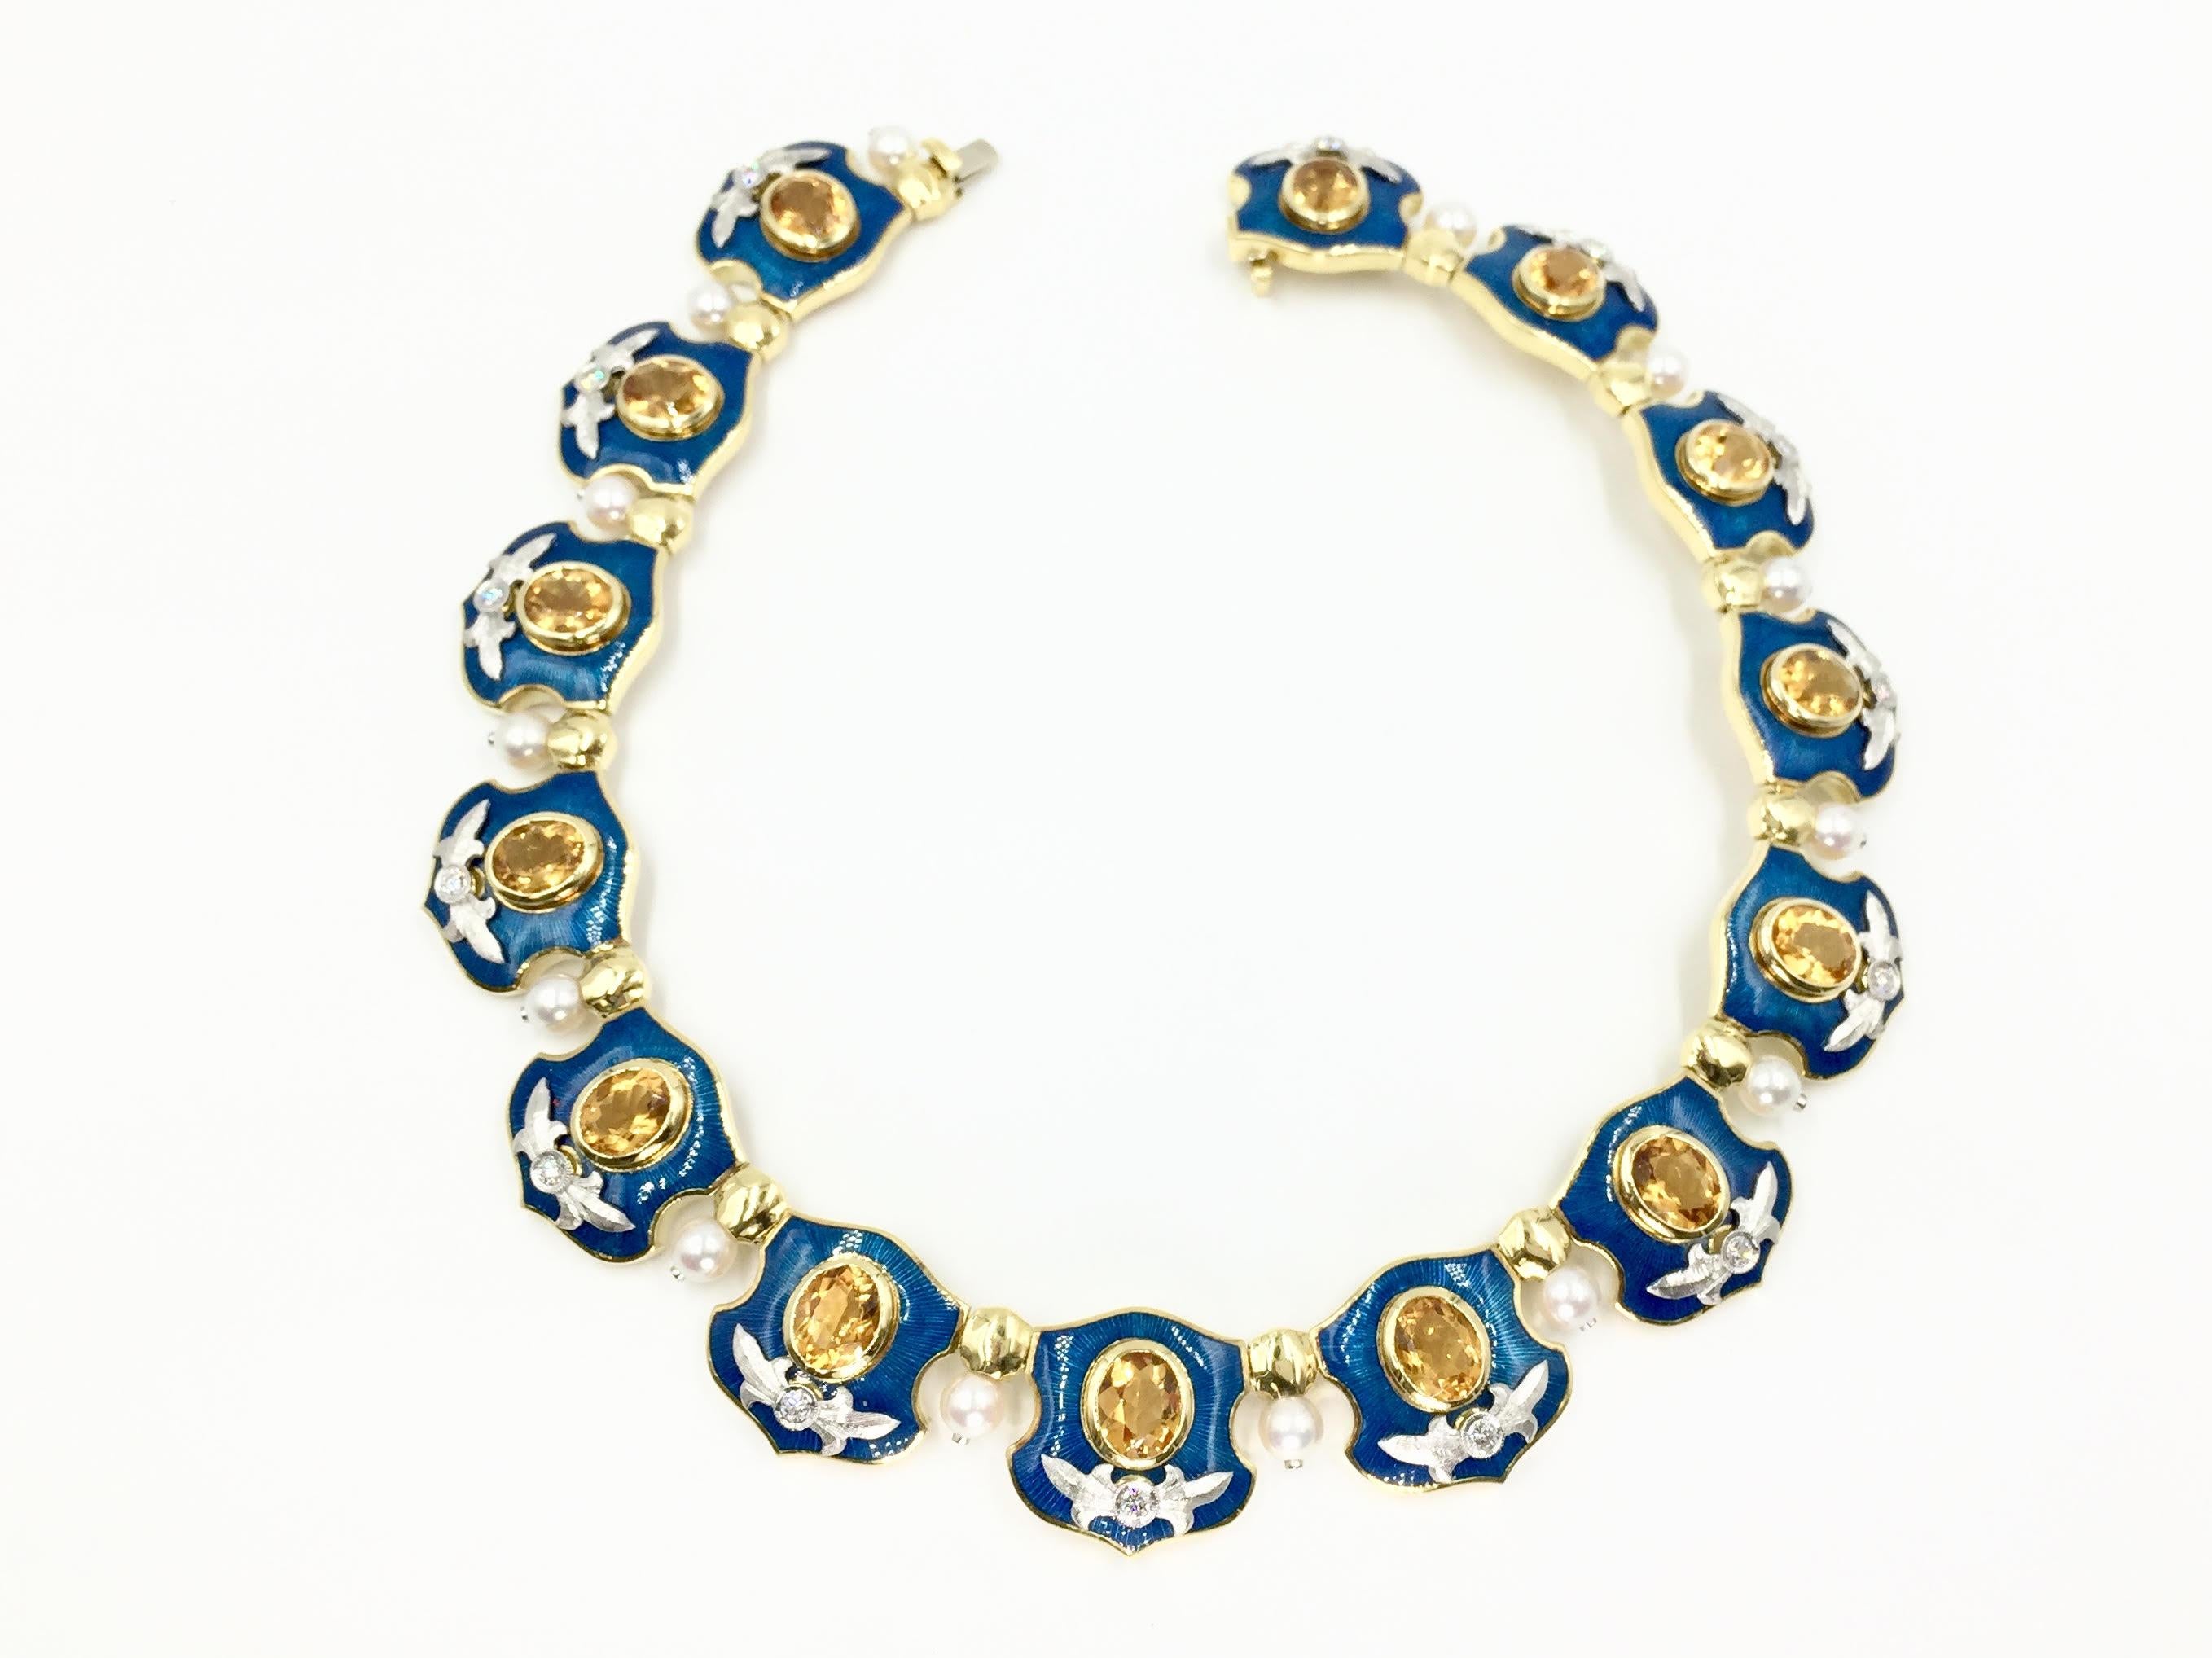 Made with incredible craftsmenship by American designer, Mitchell Peck. This colorful and substantial collar style necklace features 14 shield shaped links made of 18 karat yellow gold with hand painted bright turquoise blue colored enamel. A large